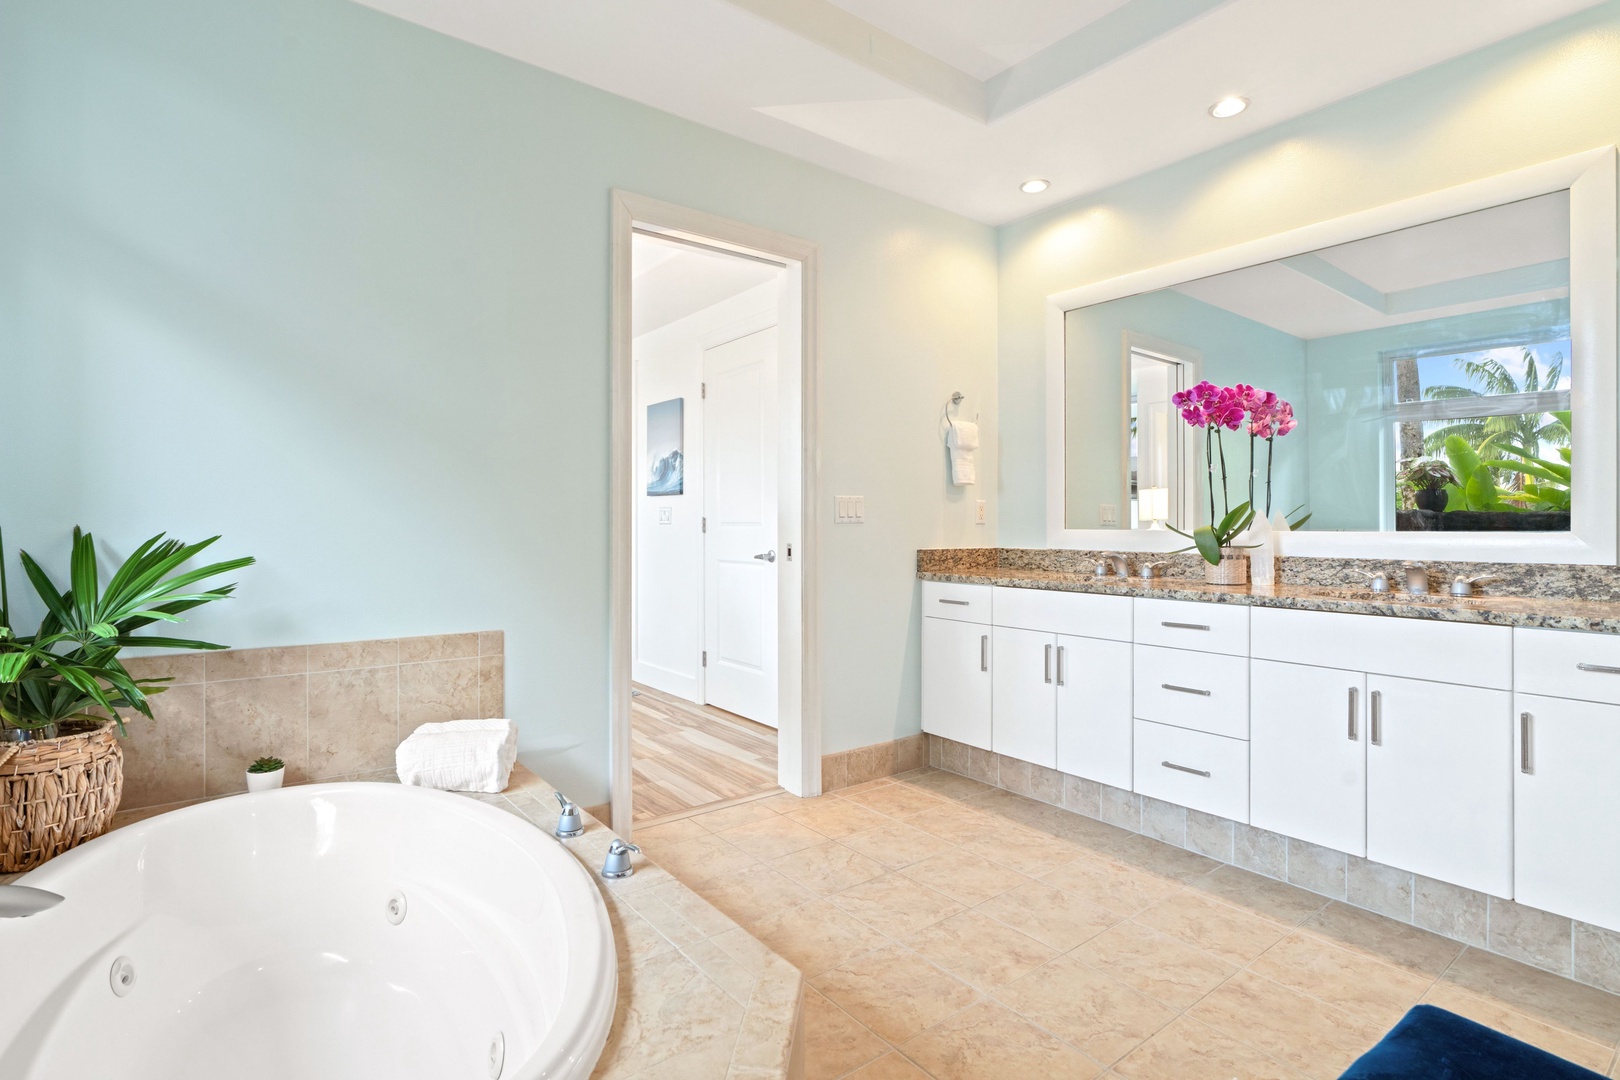 Princeville Vacation Rentals, Tropical Elegance - Step into a tranquil ensuite bathroom painted in a calming shade of blue.